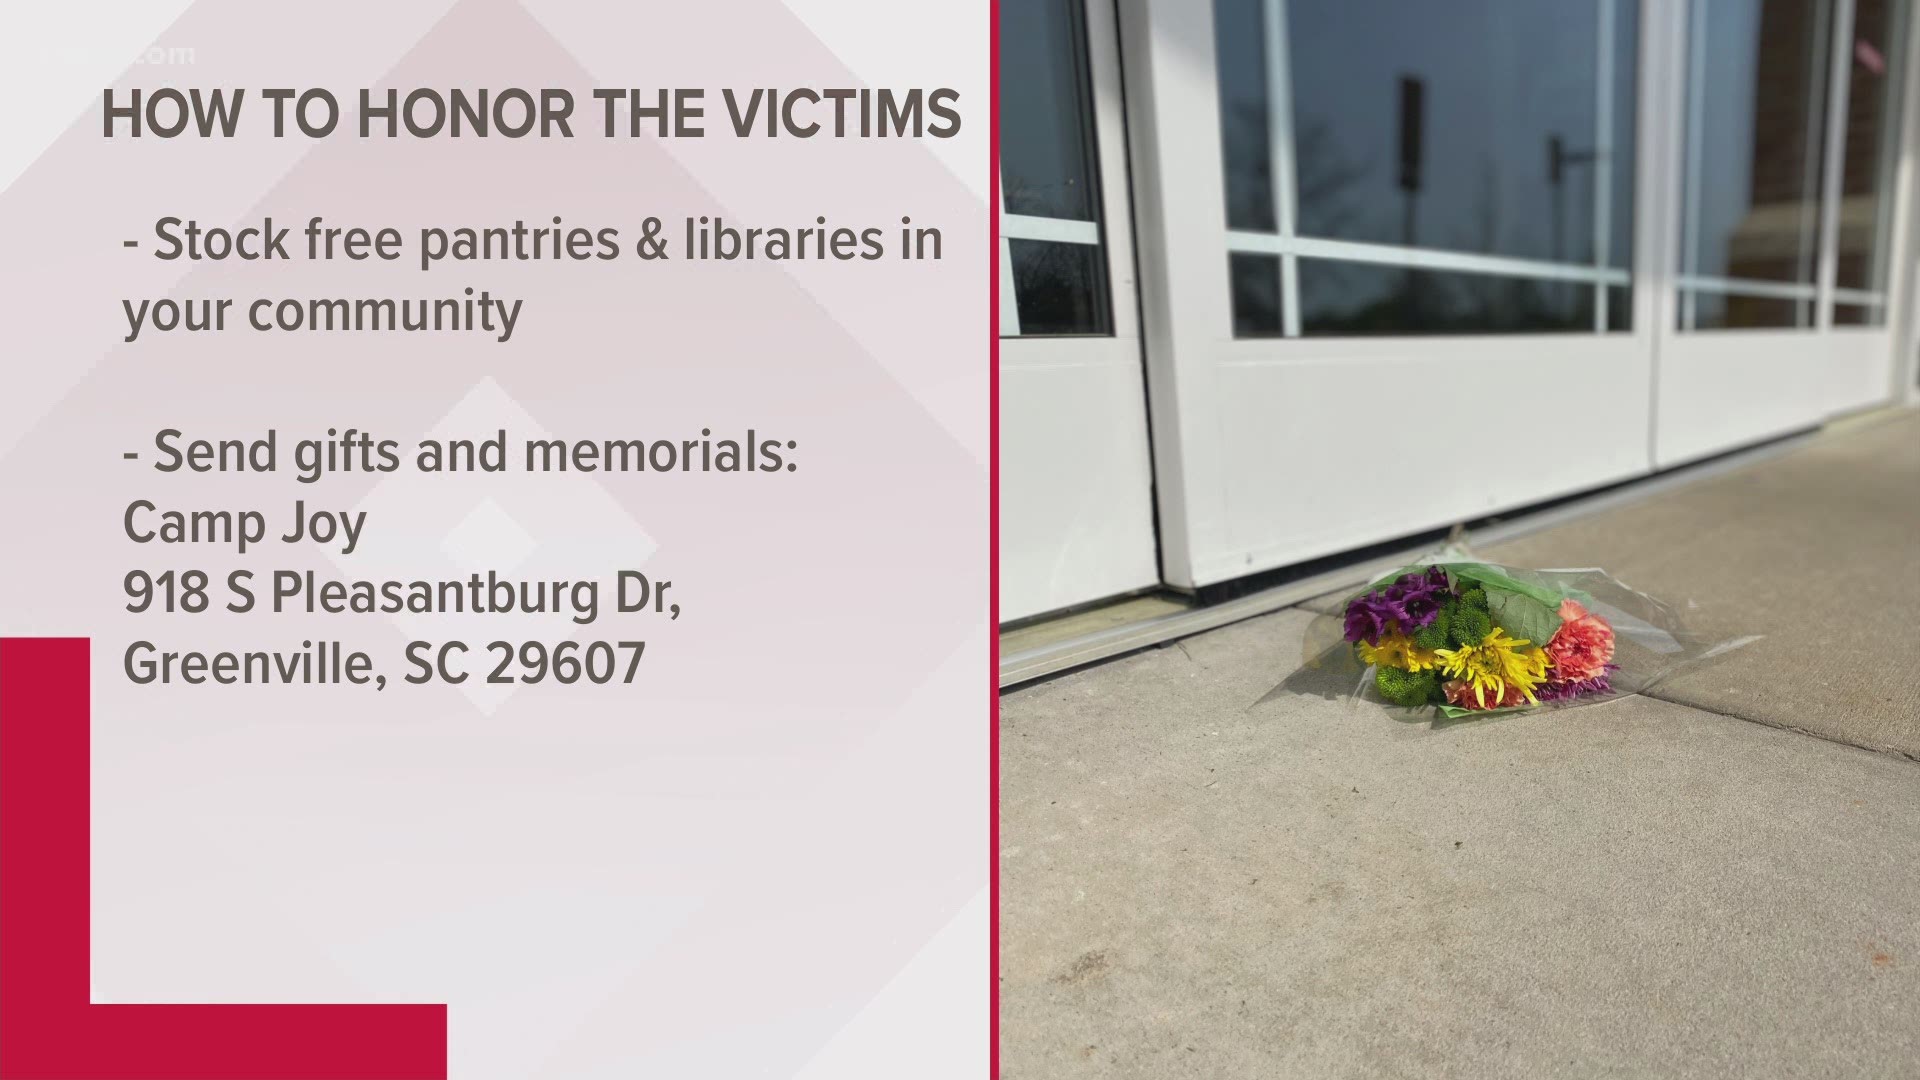 Family of the victims are asking for the community to help stock free pantries and libraries.